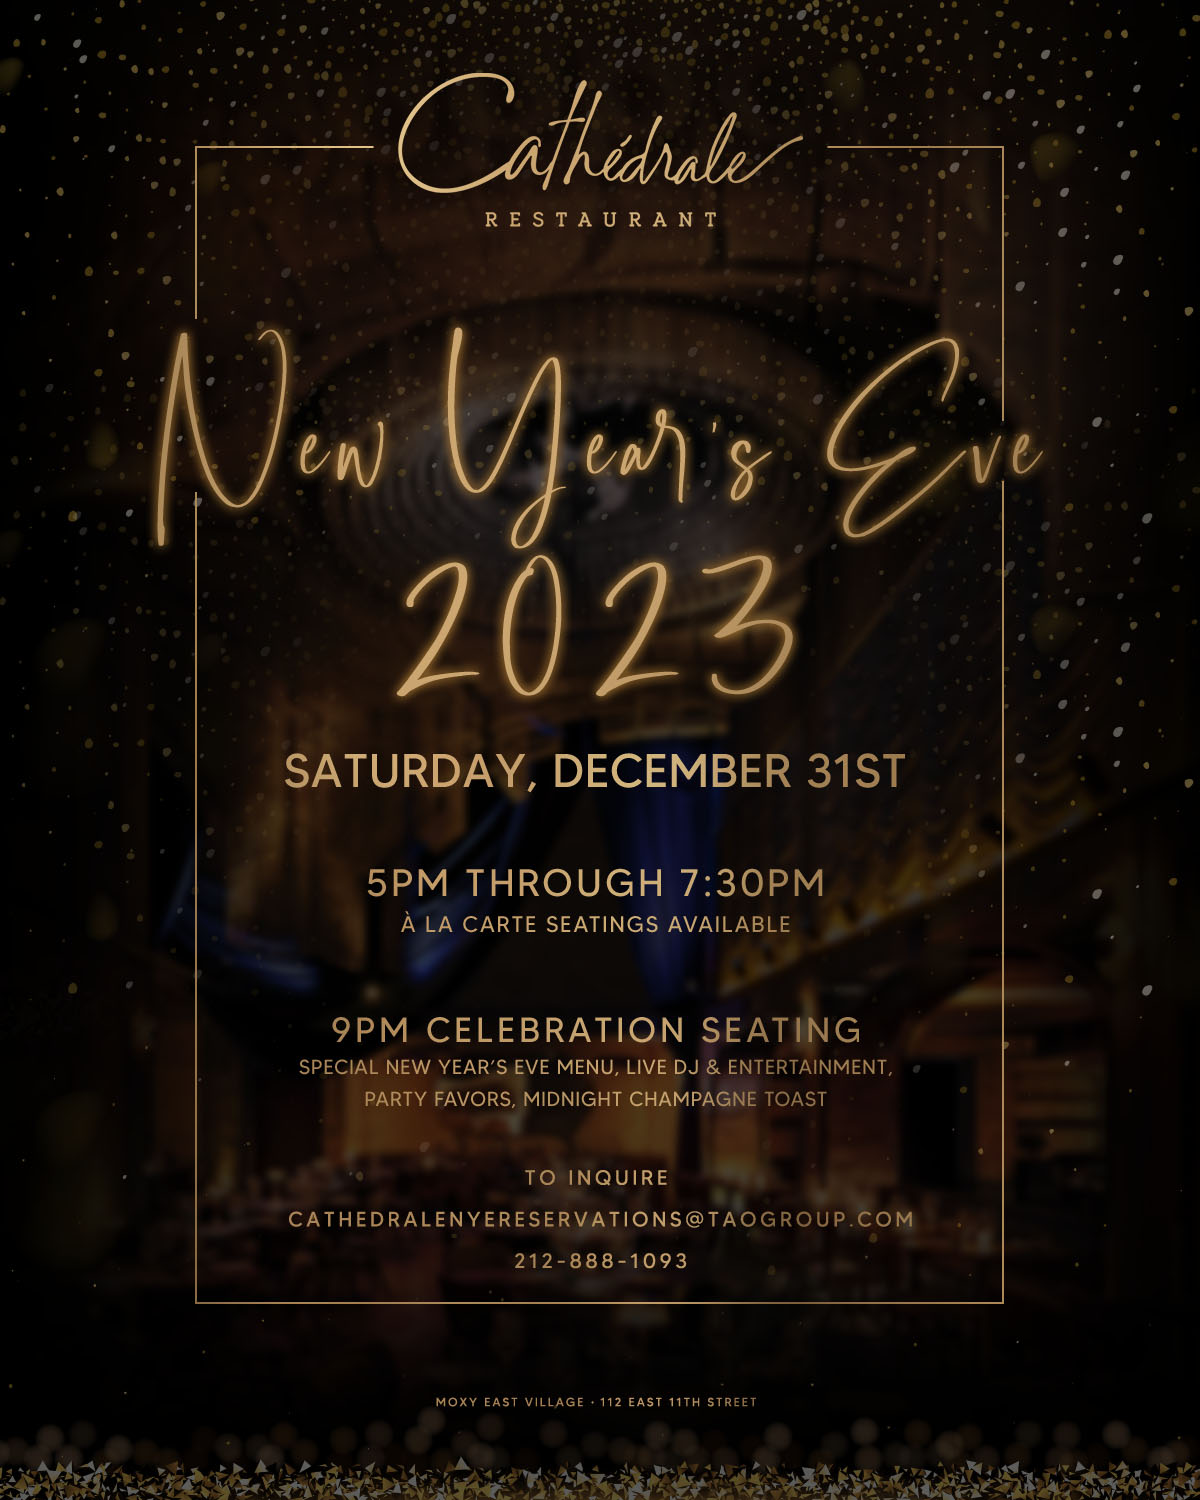 New year's eve at cathedrale nyc